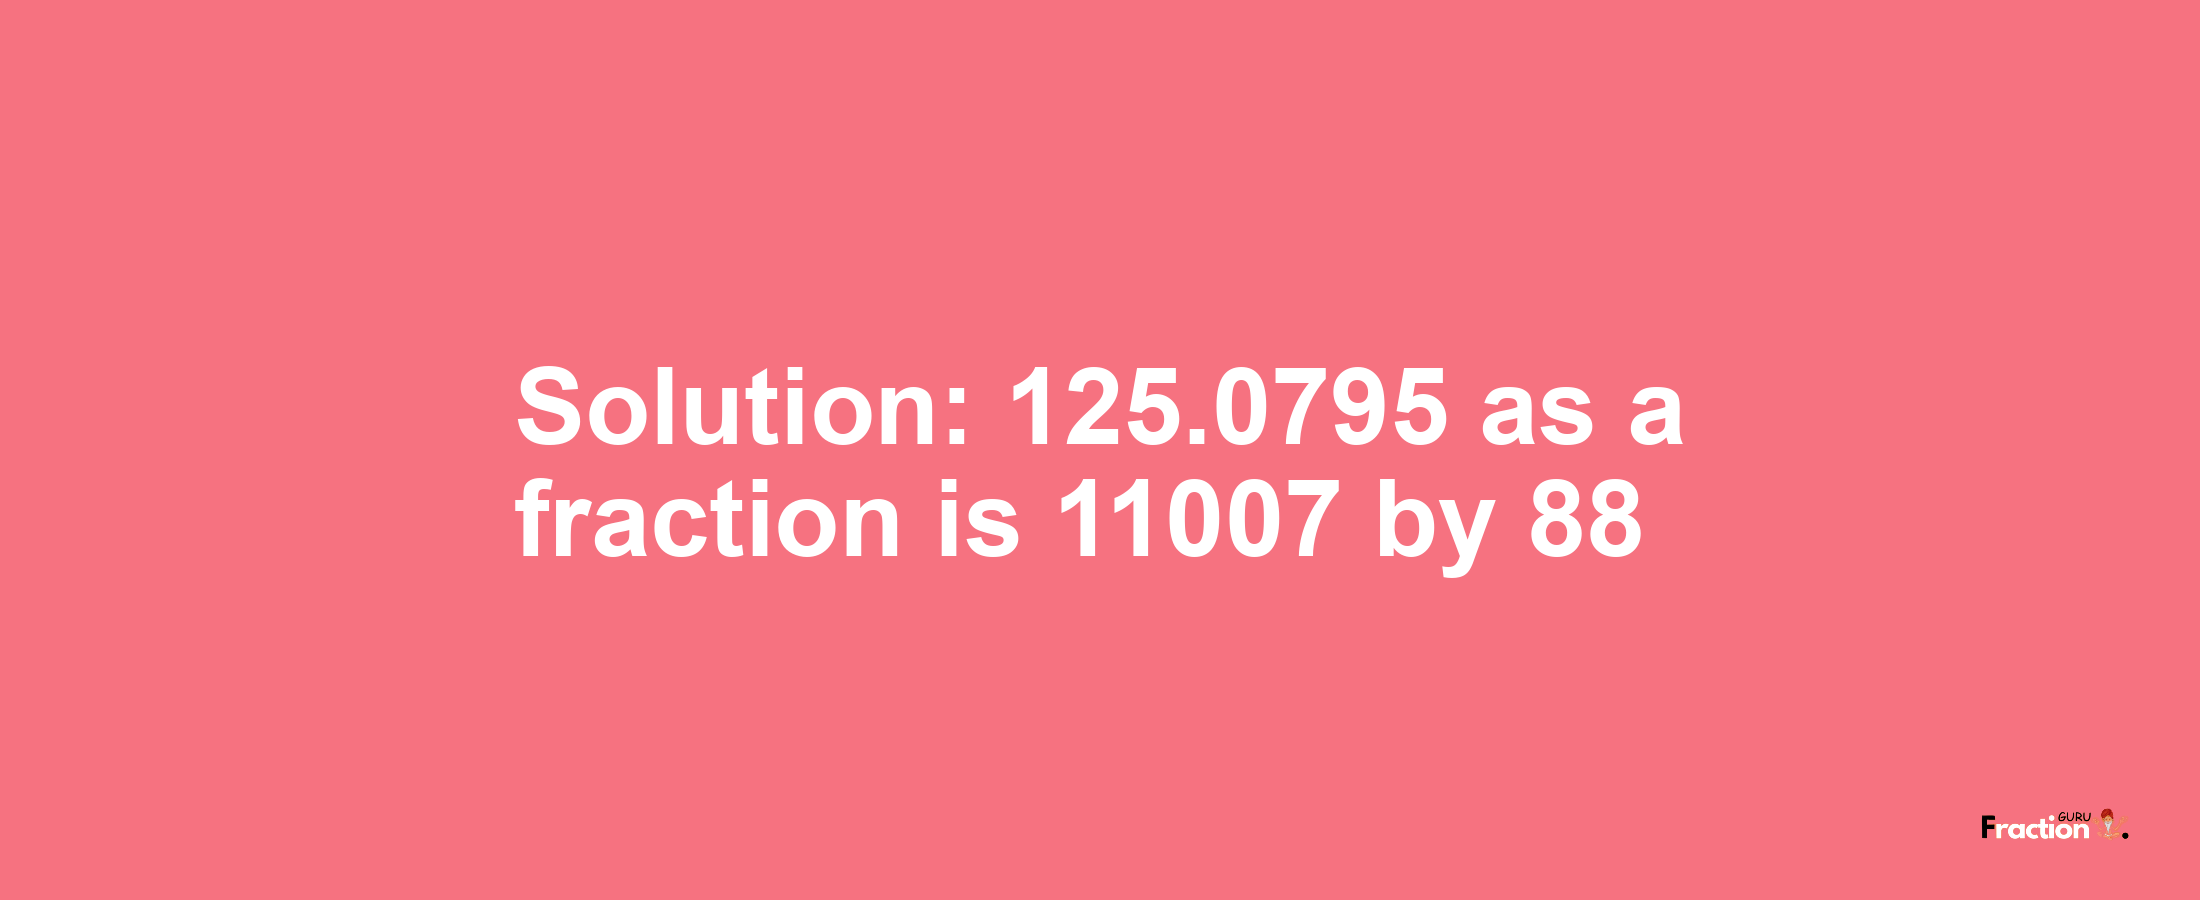 Solution:125.0795 as a fraction is 11007/88